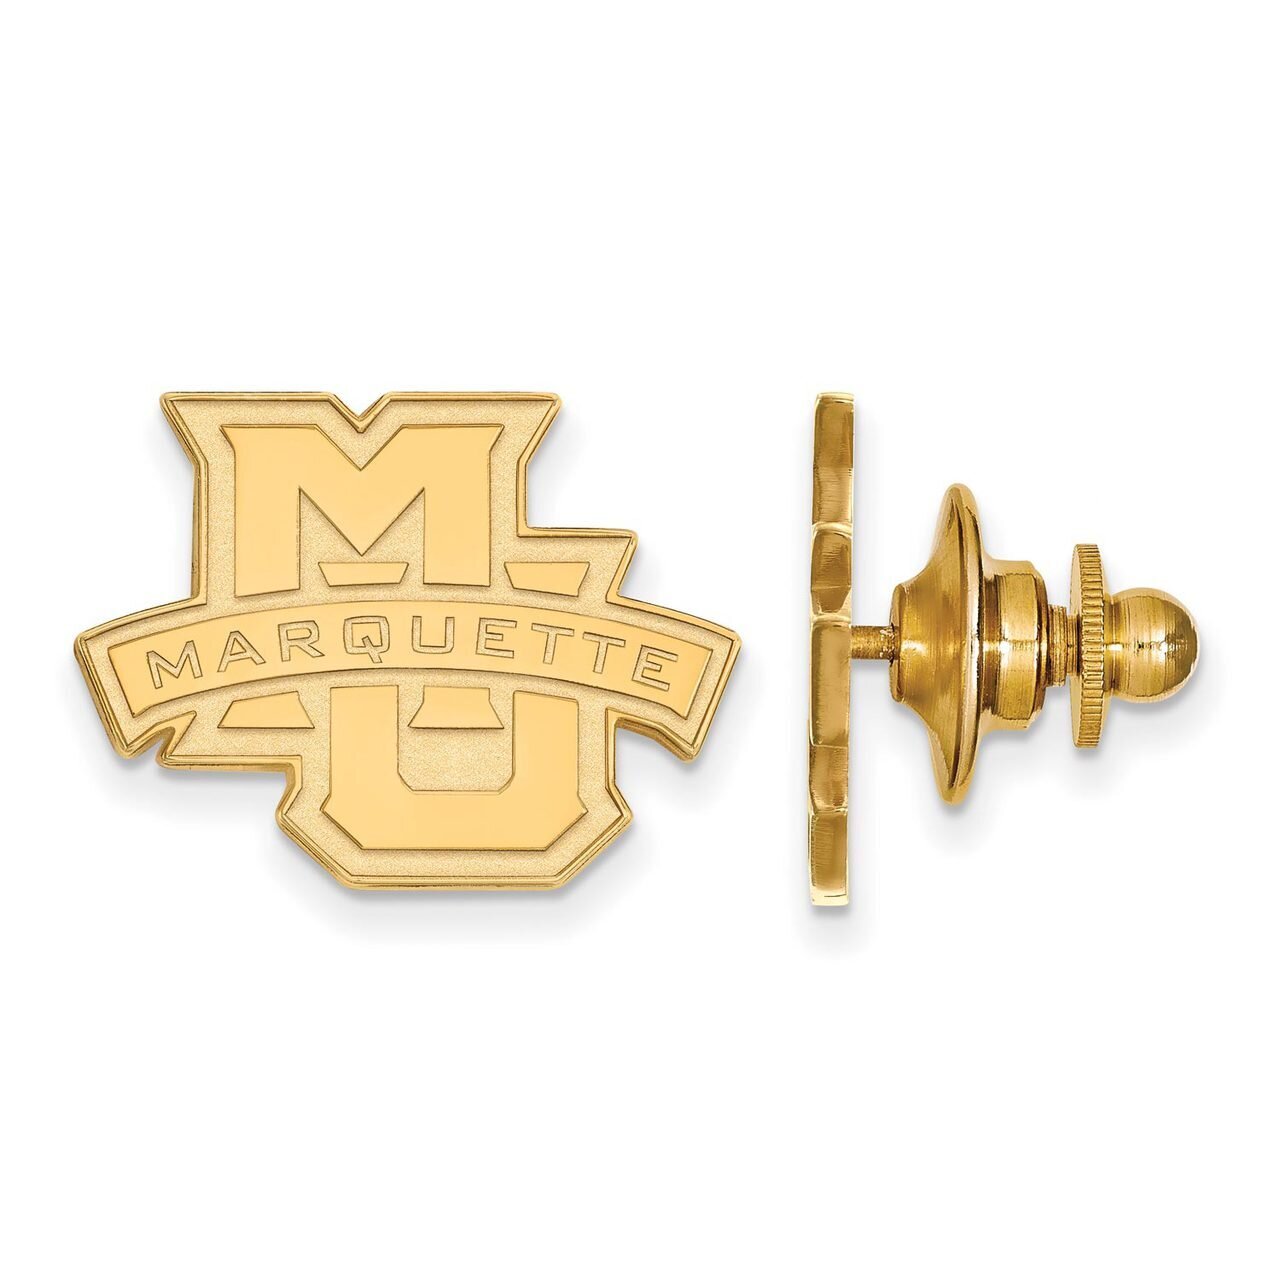 Marquette University Lapel Pin Gold-plated Silver GP028MAR